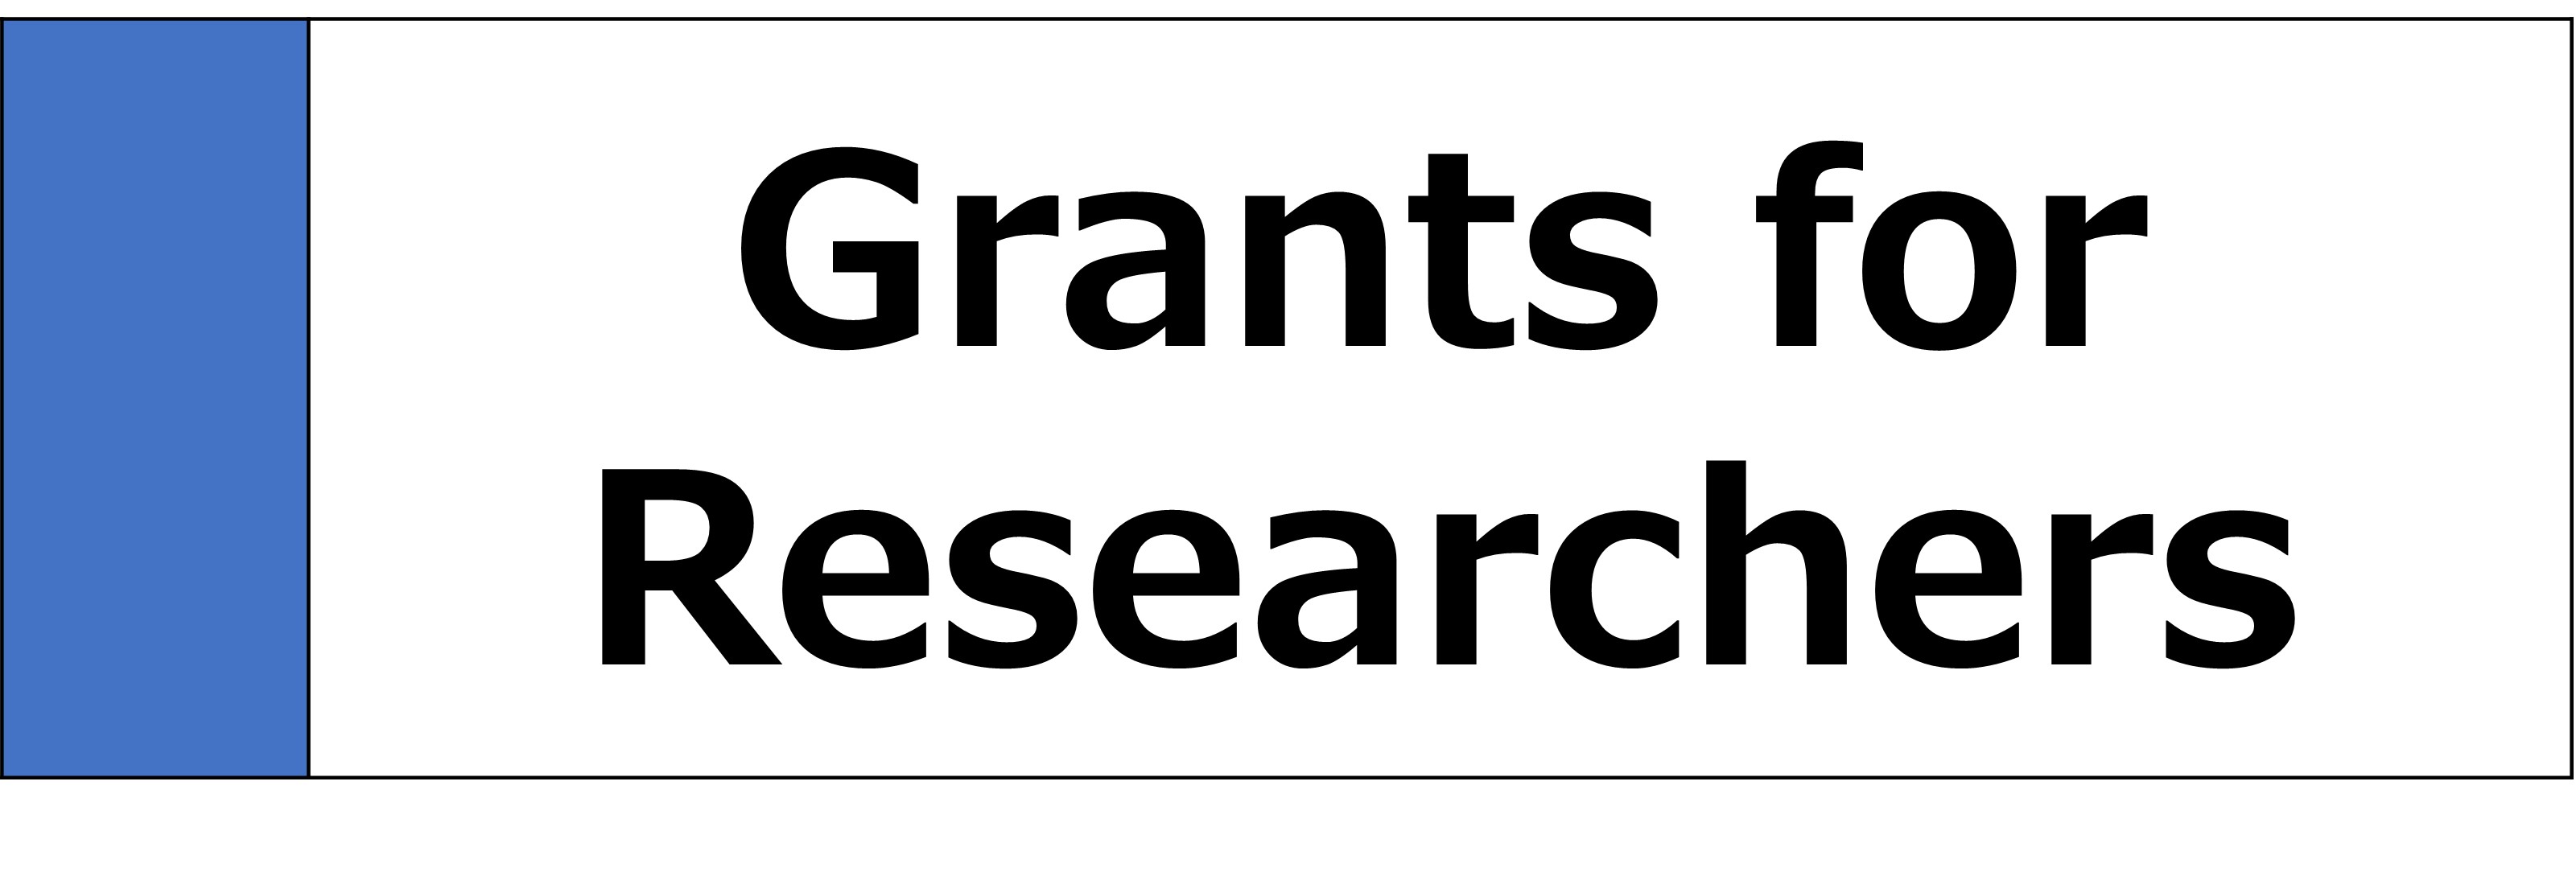 Grants for Non-Japanese Researchers
